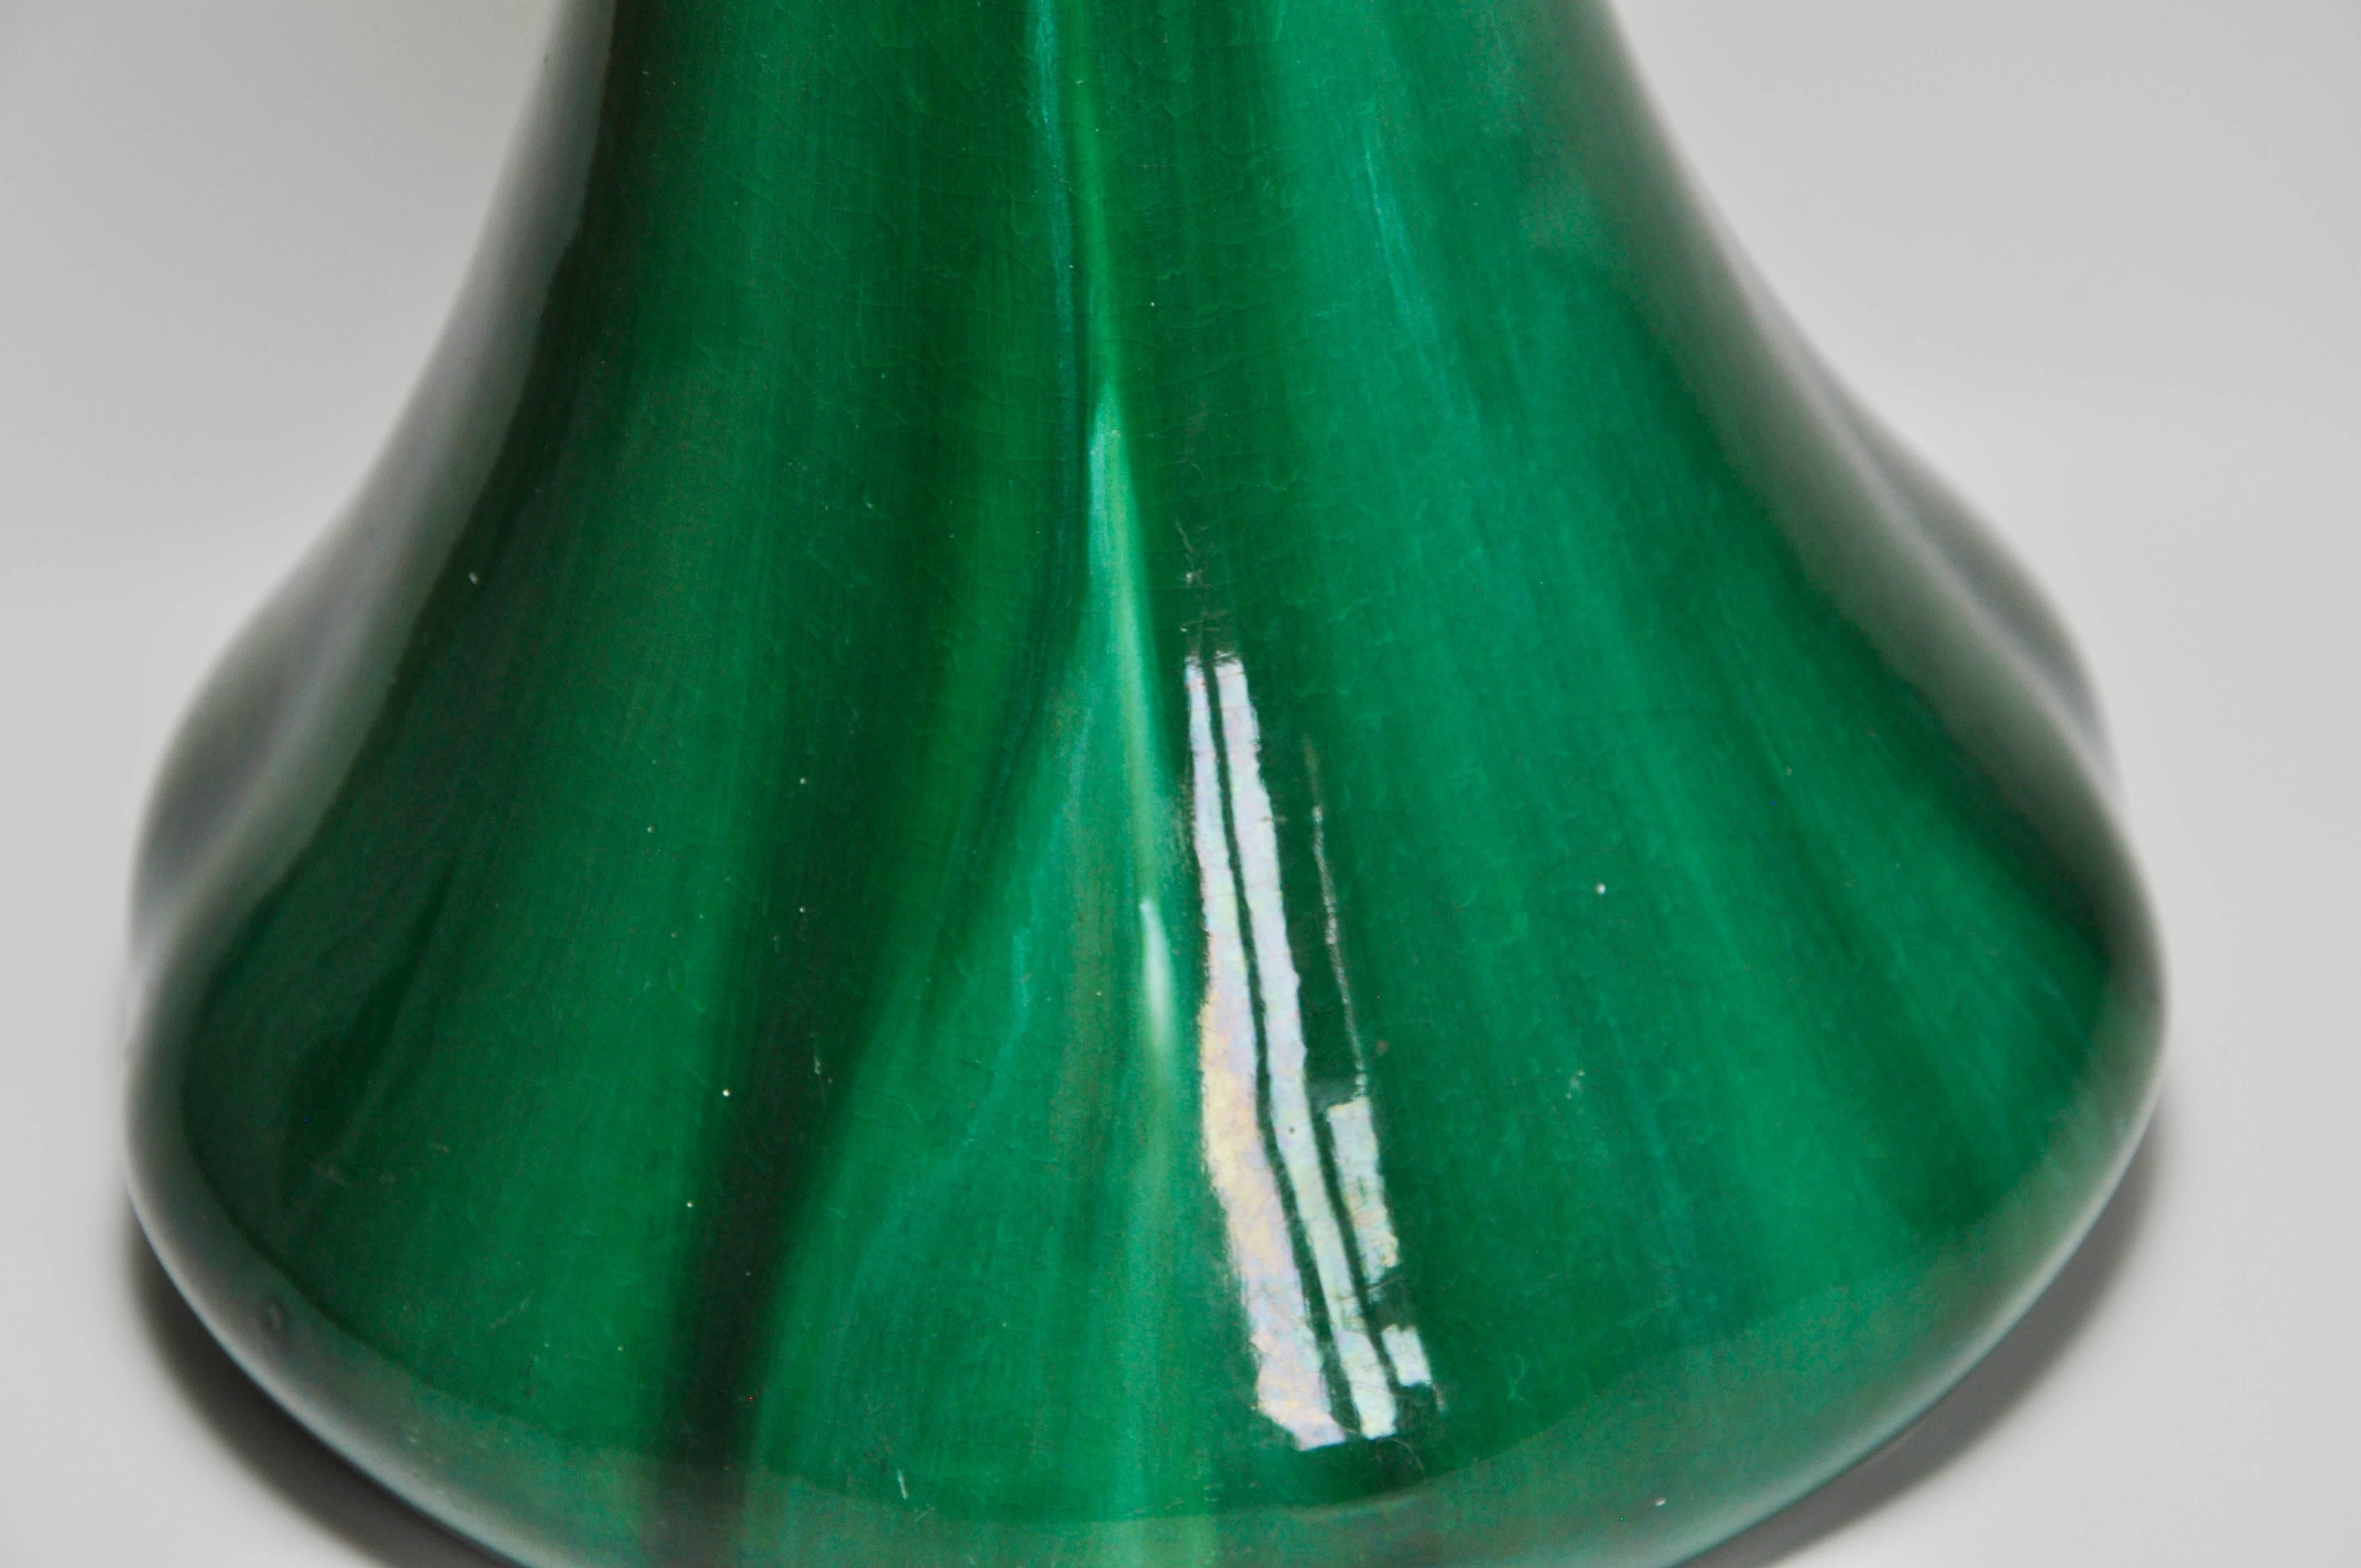 A beautiful piece of English art pottery with a glossy jade green glaze with elegant lines flowing down the tall neck into a voluptuous base. Japonist in shape and rather bulbous in form like a tulip with delicate rounded bulges both top and bottom.